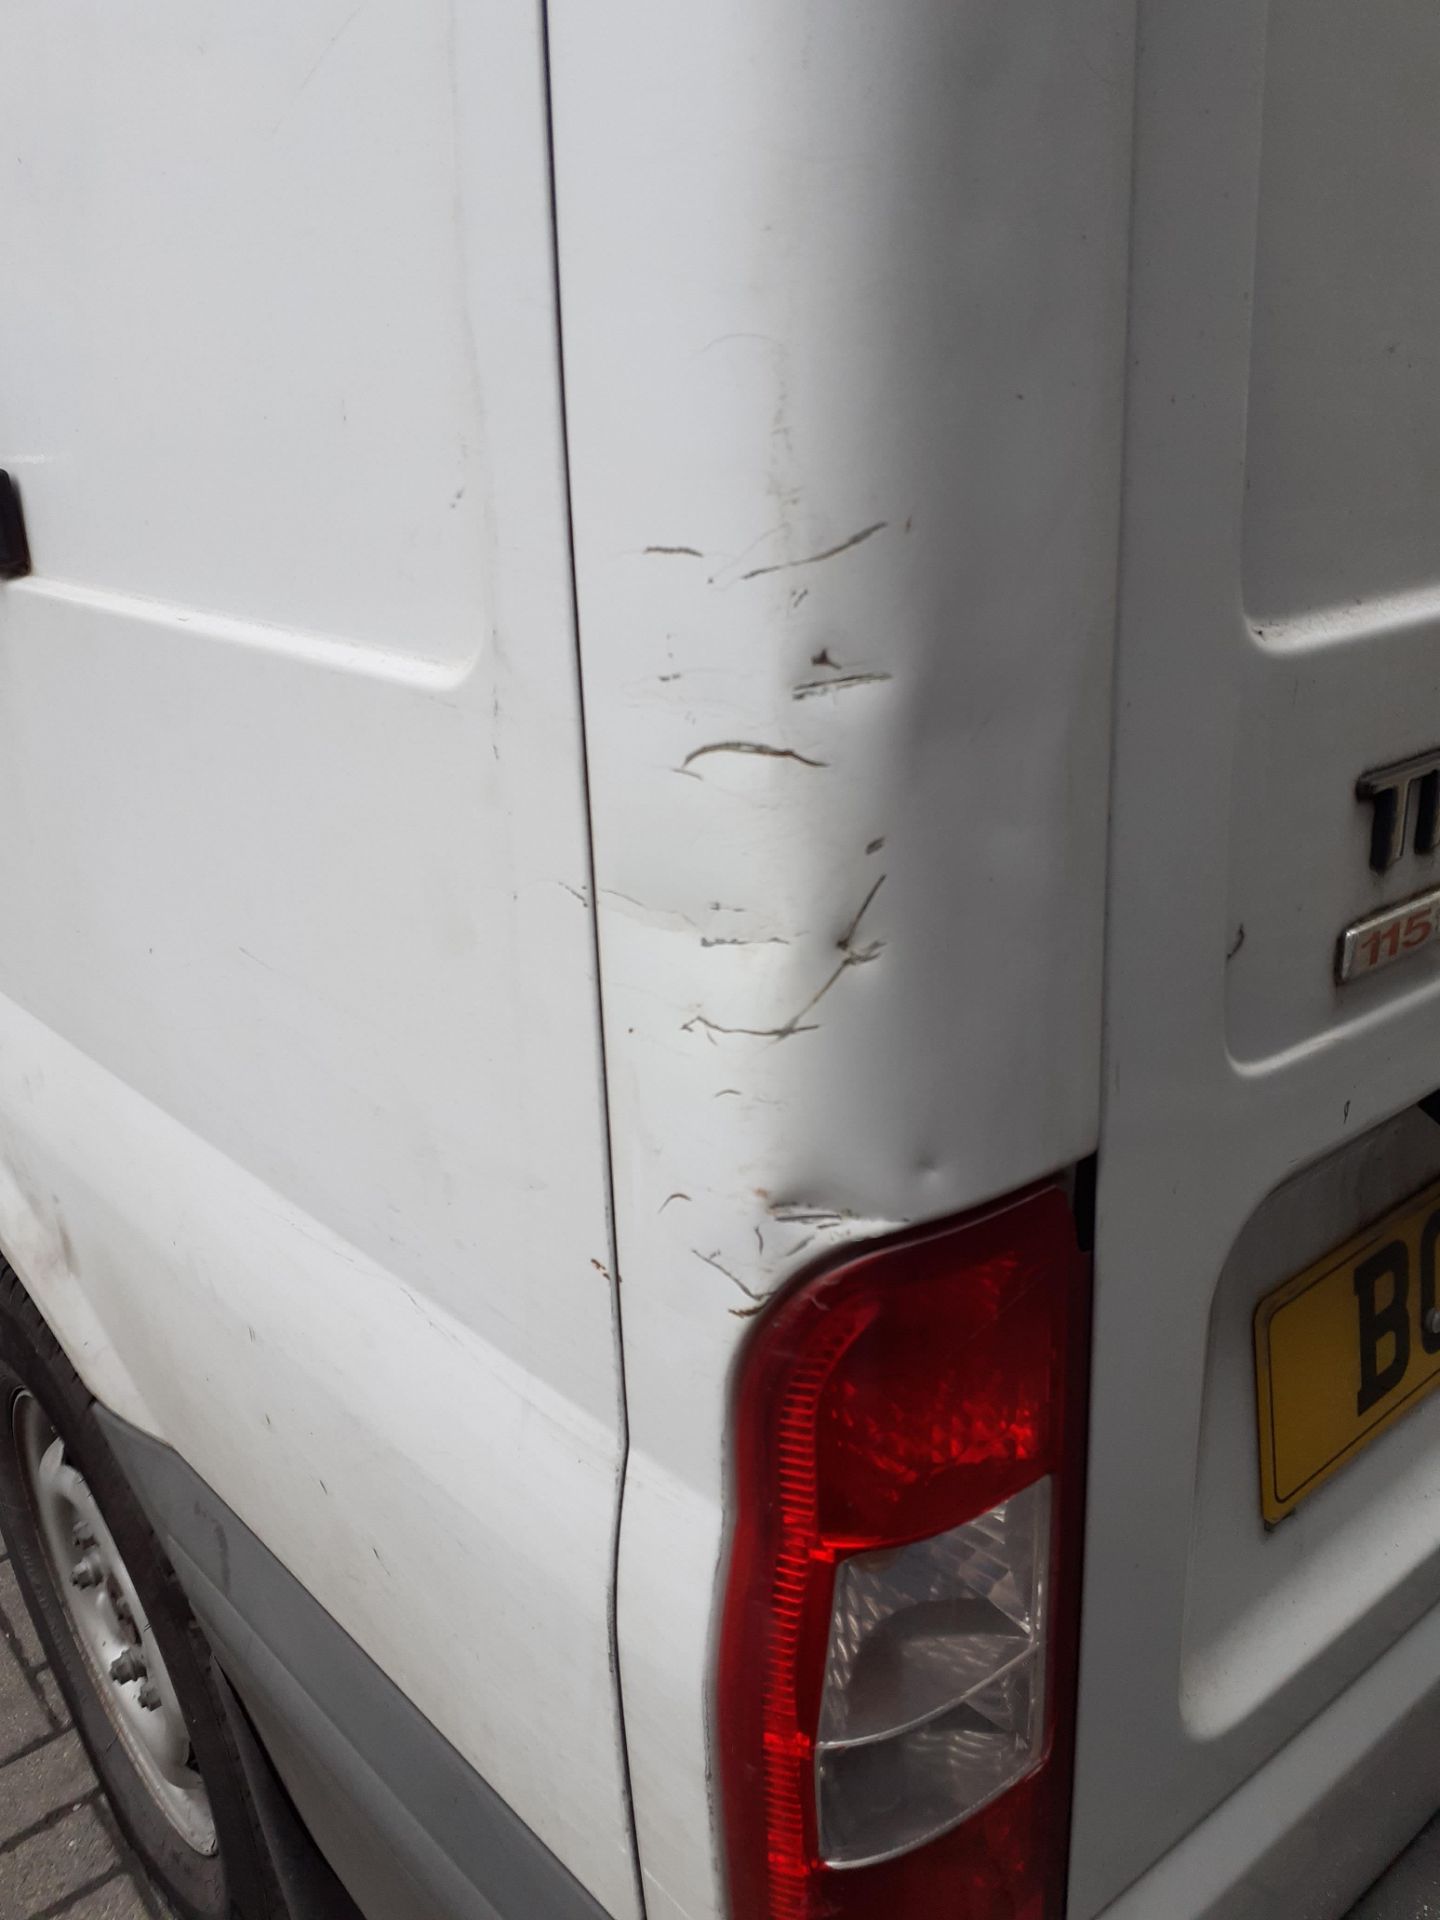 Ford Transit 115 T350 Panel Van (fitted towbar) registration BG11 UHY, first registered March - Image 7 of 13